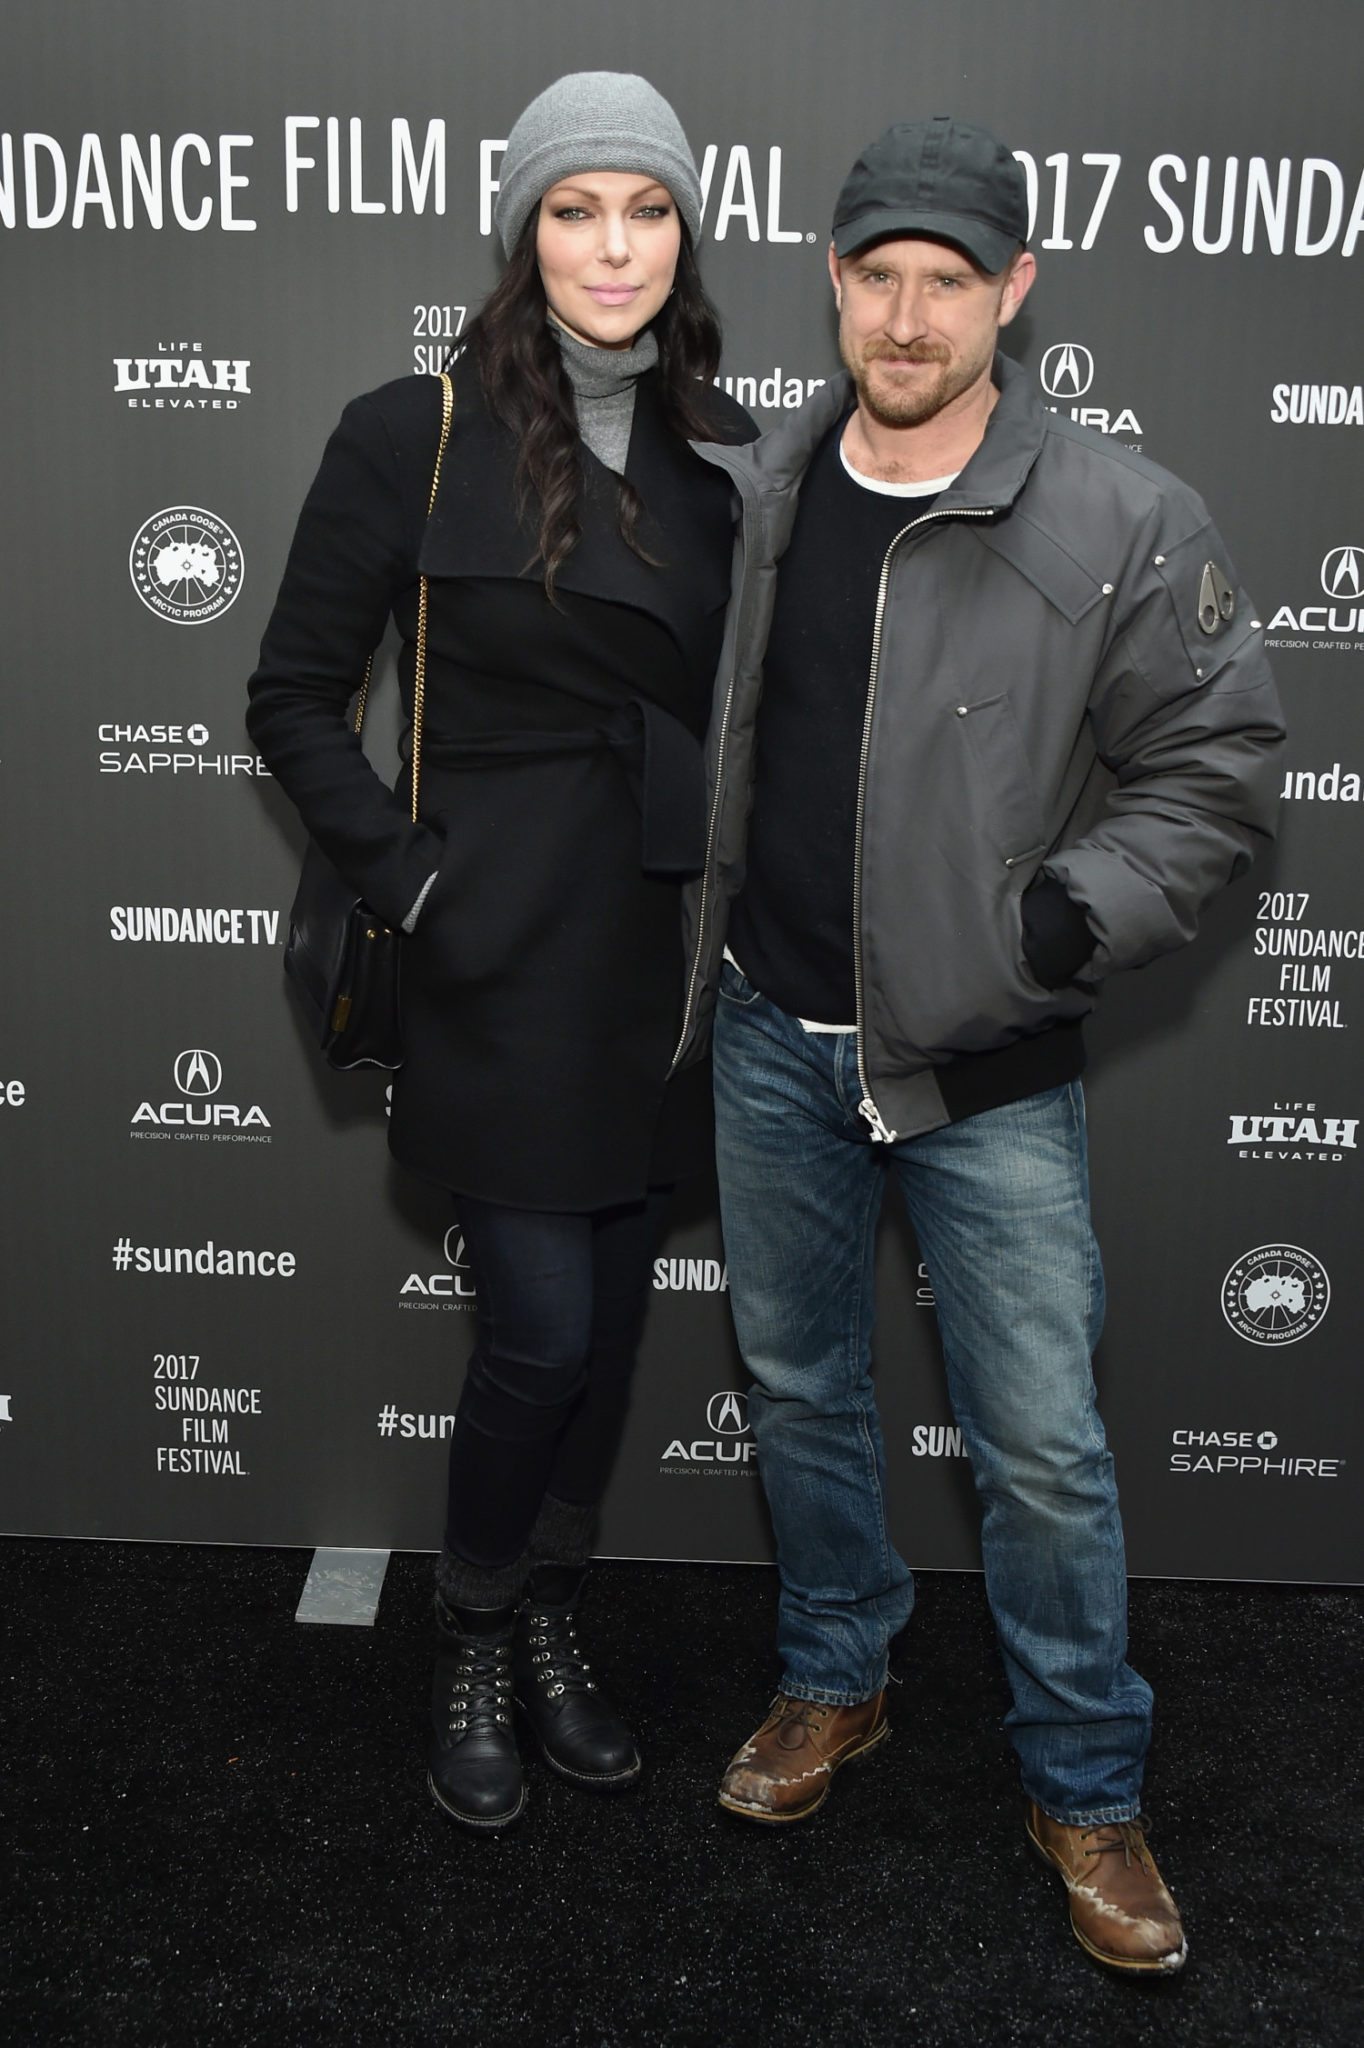 PARK CITY, UT - JANUARY 21: Laura Prepon and Ben Foster attend the "The Hero" premiere on day 3 of the 2017 Sundance Film Festival at Library Center Theater on January 21, 2017 in Park City, Utah. (Photo by Michael Loccisano/Getty Images for Sundance Film Festival)